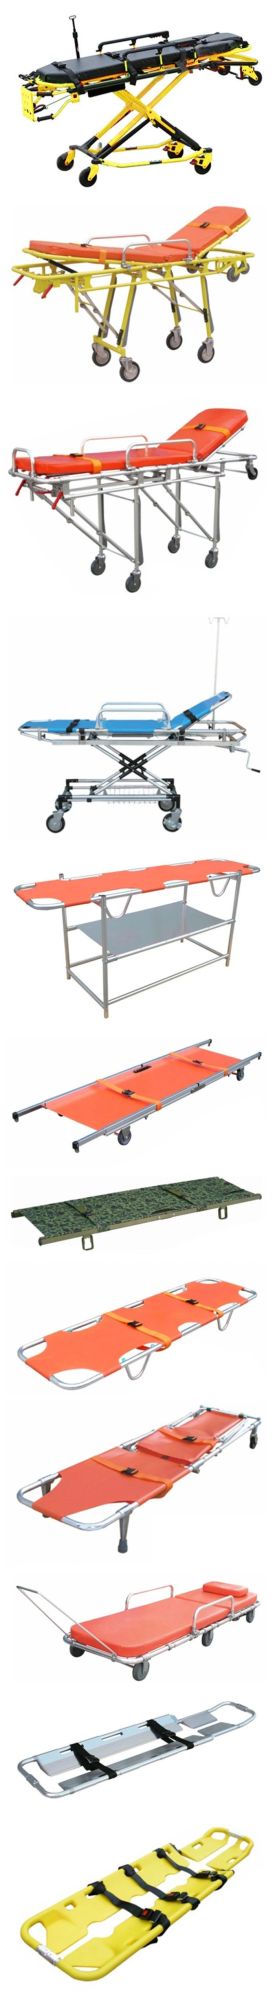 Rescue Lifeguard Transfer Patient Folding Spine Board for Emergency